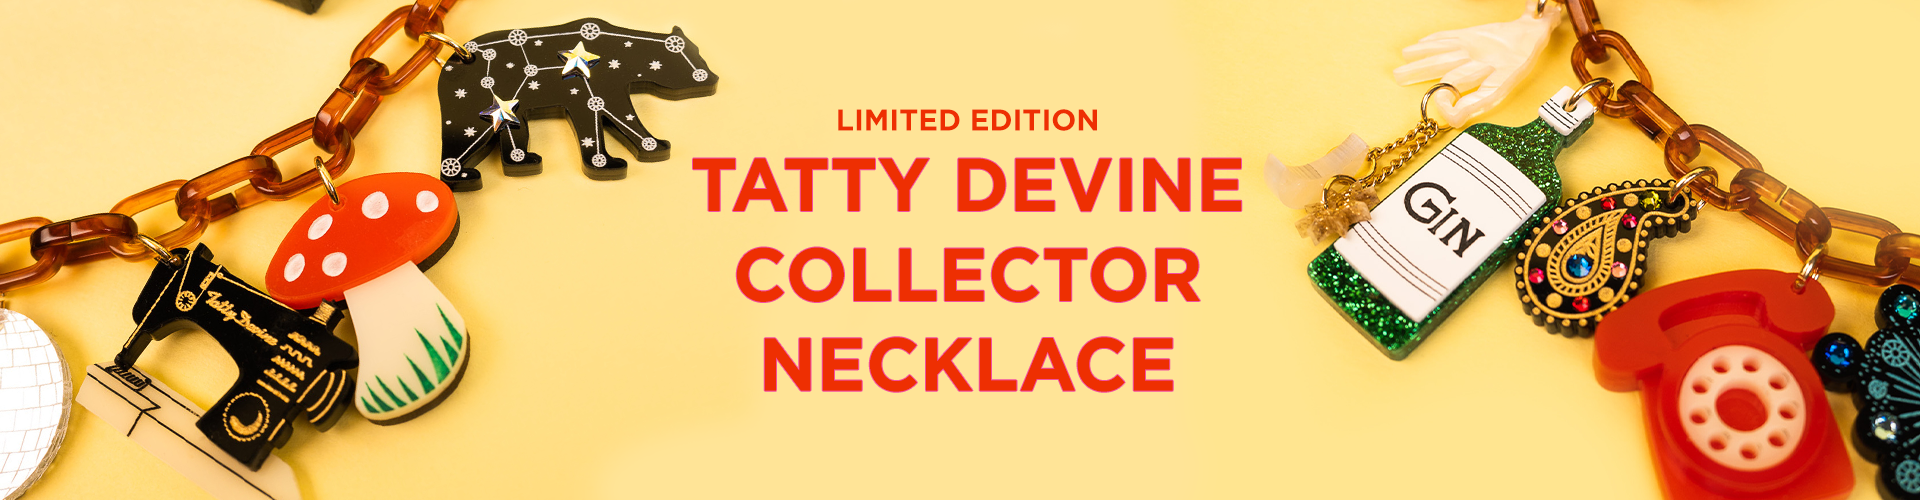 Limited Edition: Tatty Devine Collector Necklace